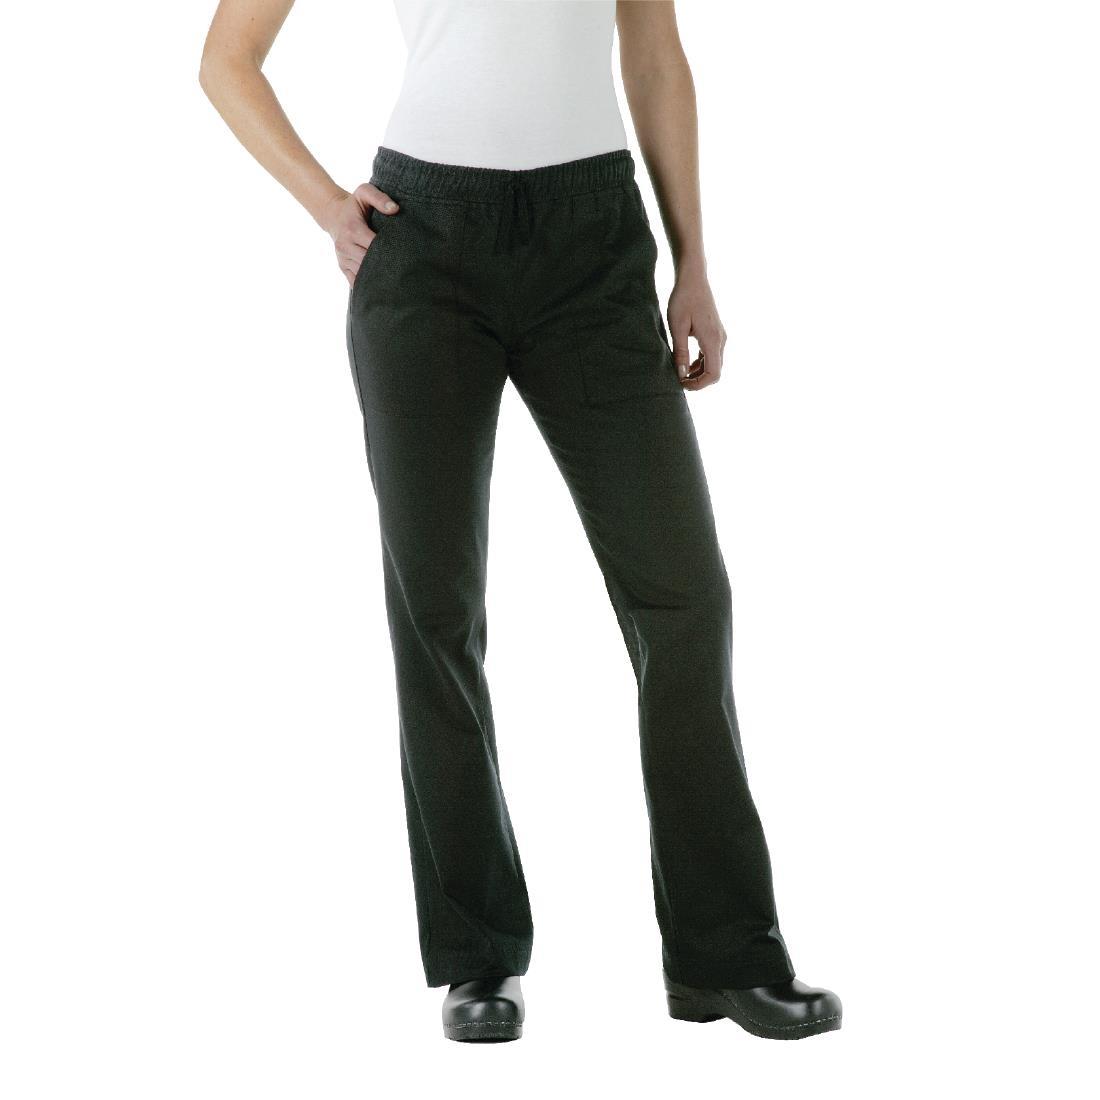 Chef Works Womens Executive Chef Trousers Black XL - A431-XL  - 1